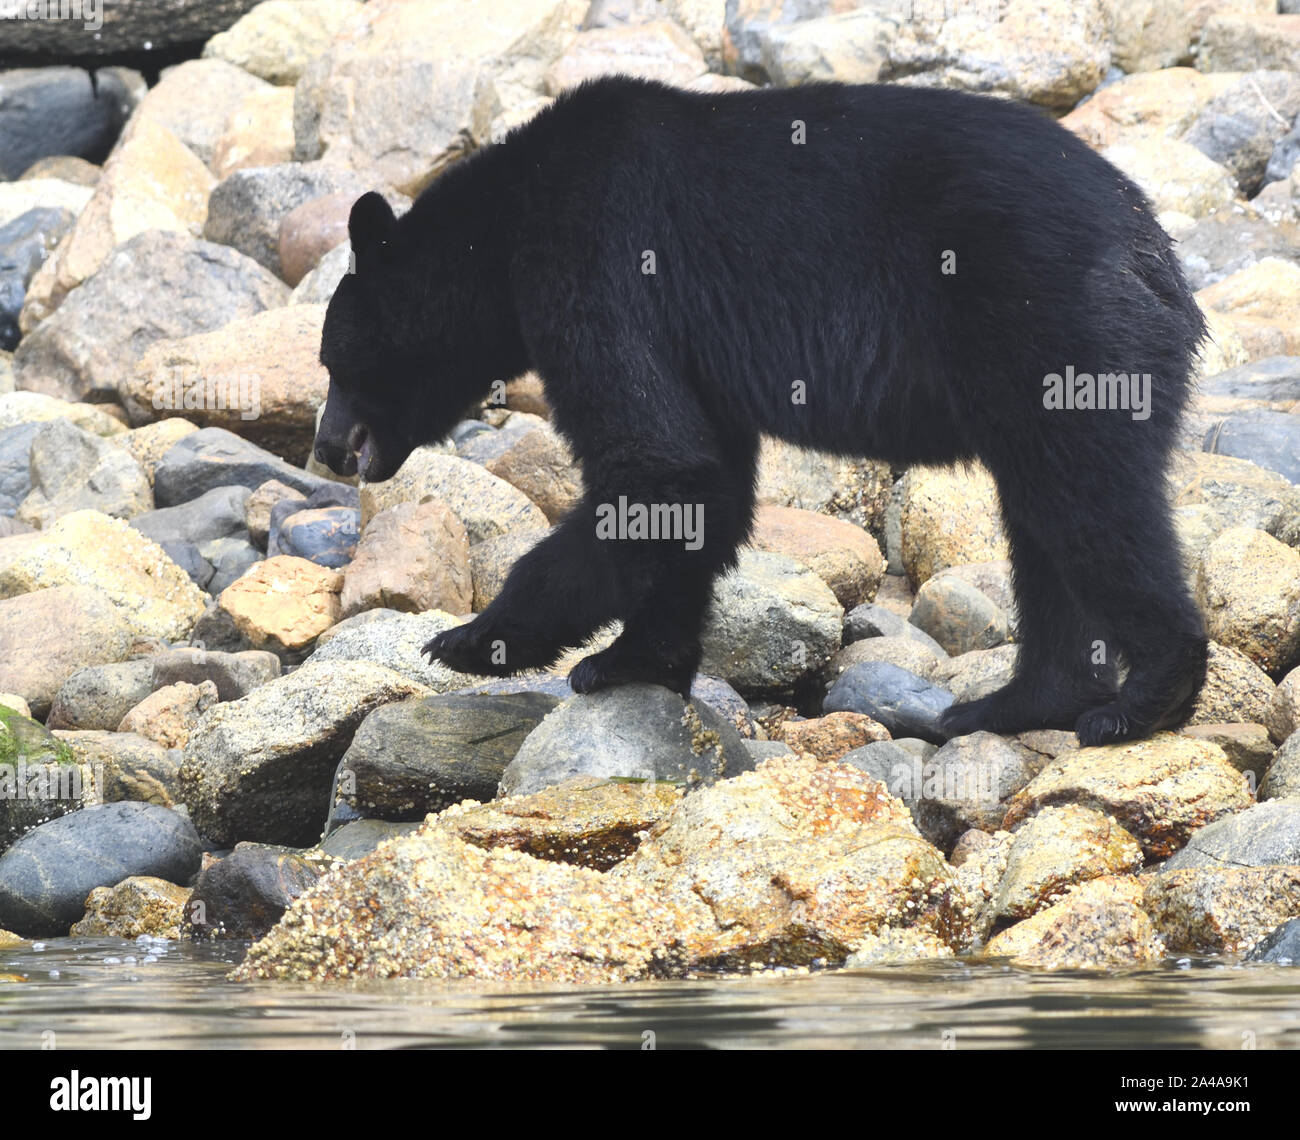 A black bear (Ursus americanus) searched for food by turning over boulders on the beach with its strong paws.  Tofino, British Columbia, Canada Stock Photo